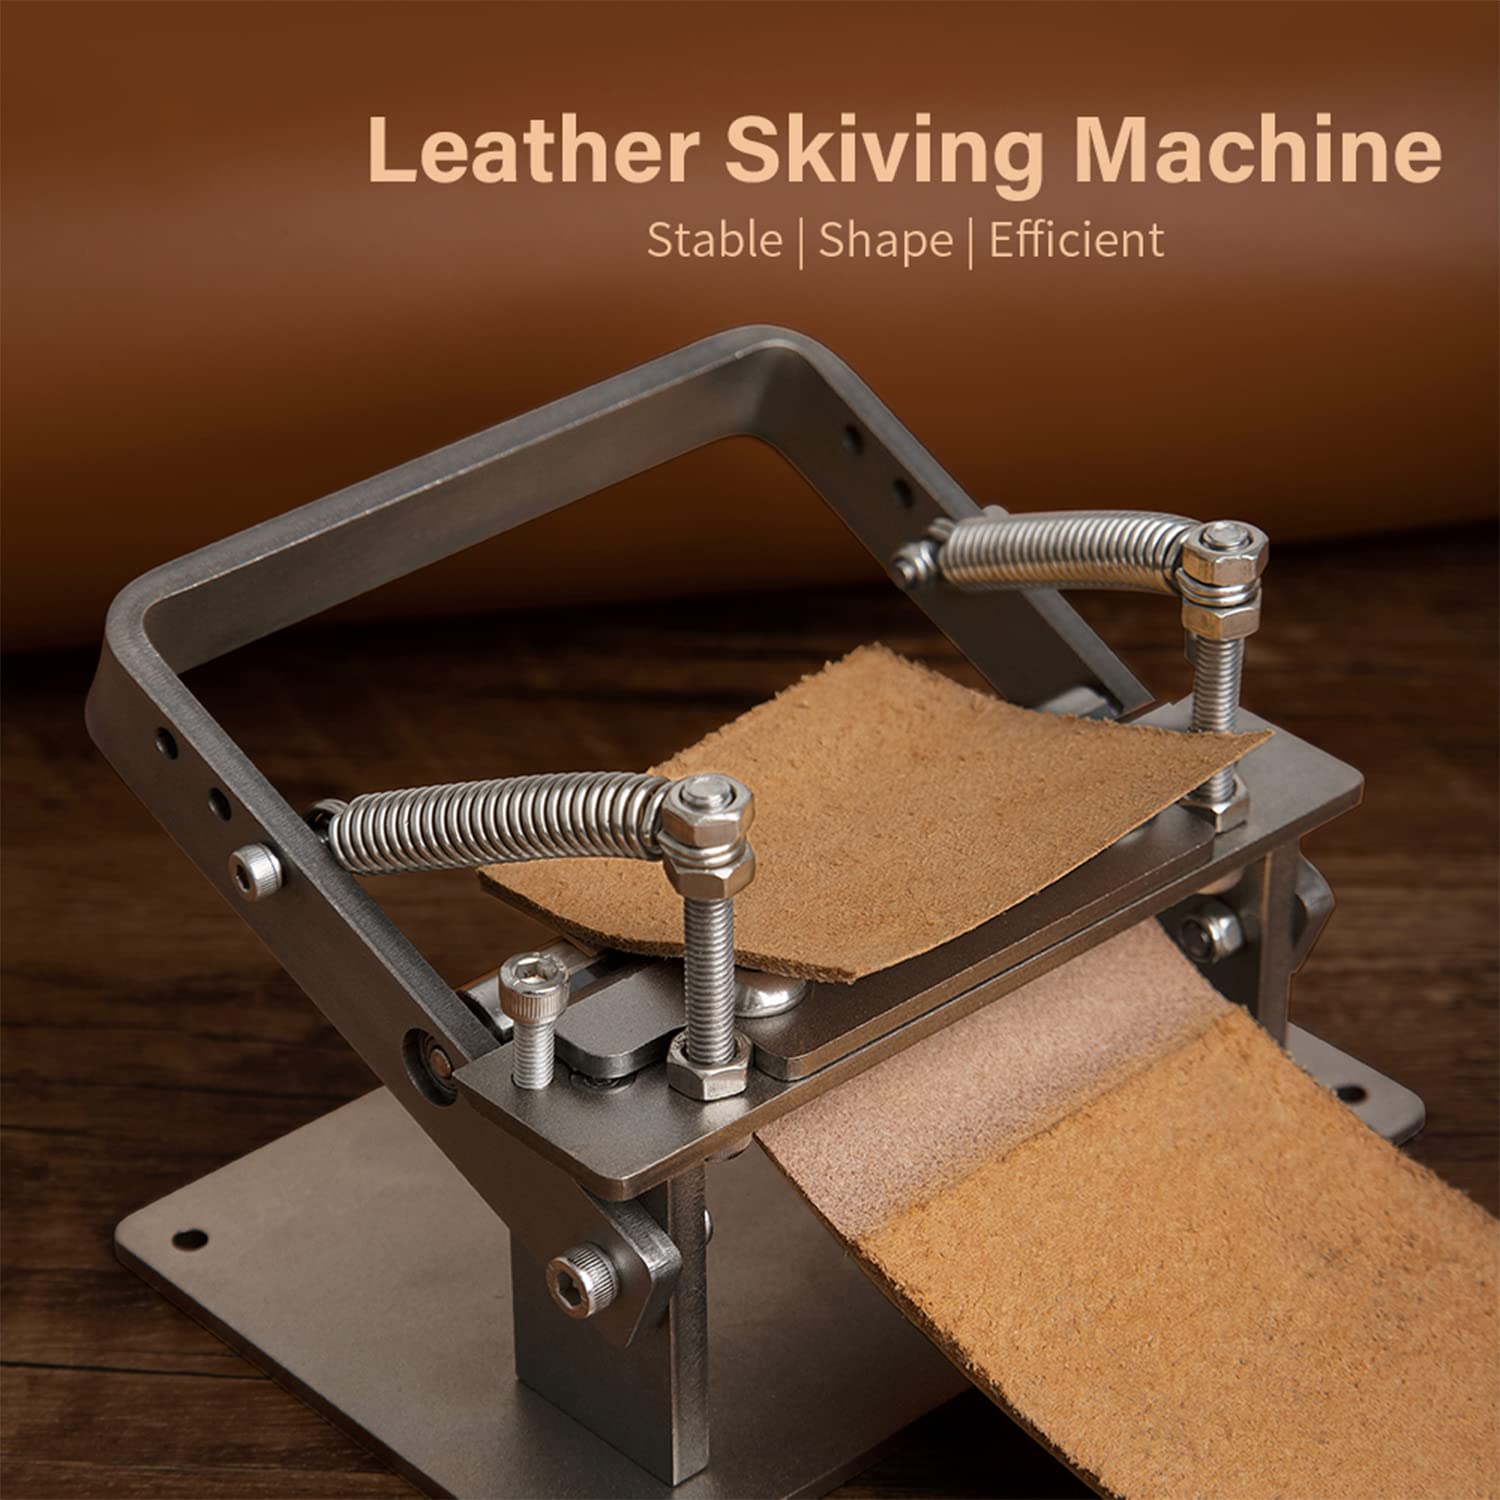 WUTA Leather Skiver Splitter Manual Leather Skiving Machine Strip Belt Thinning Leather Splitter Cowhide Leather Peeling Machine DIY Strap Cutting Tools for Thinning